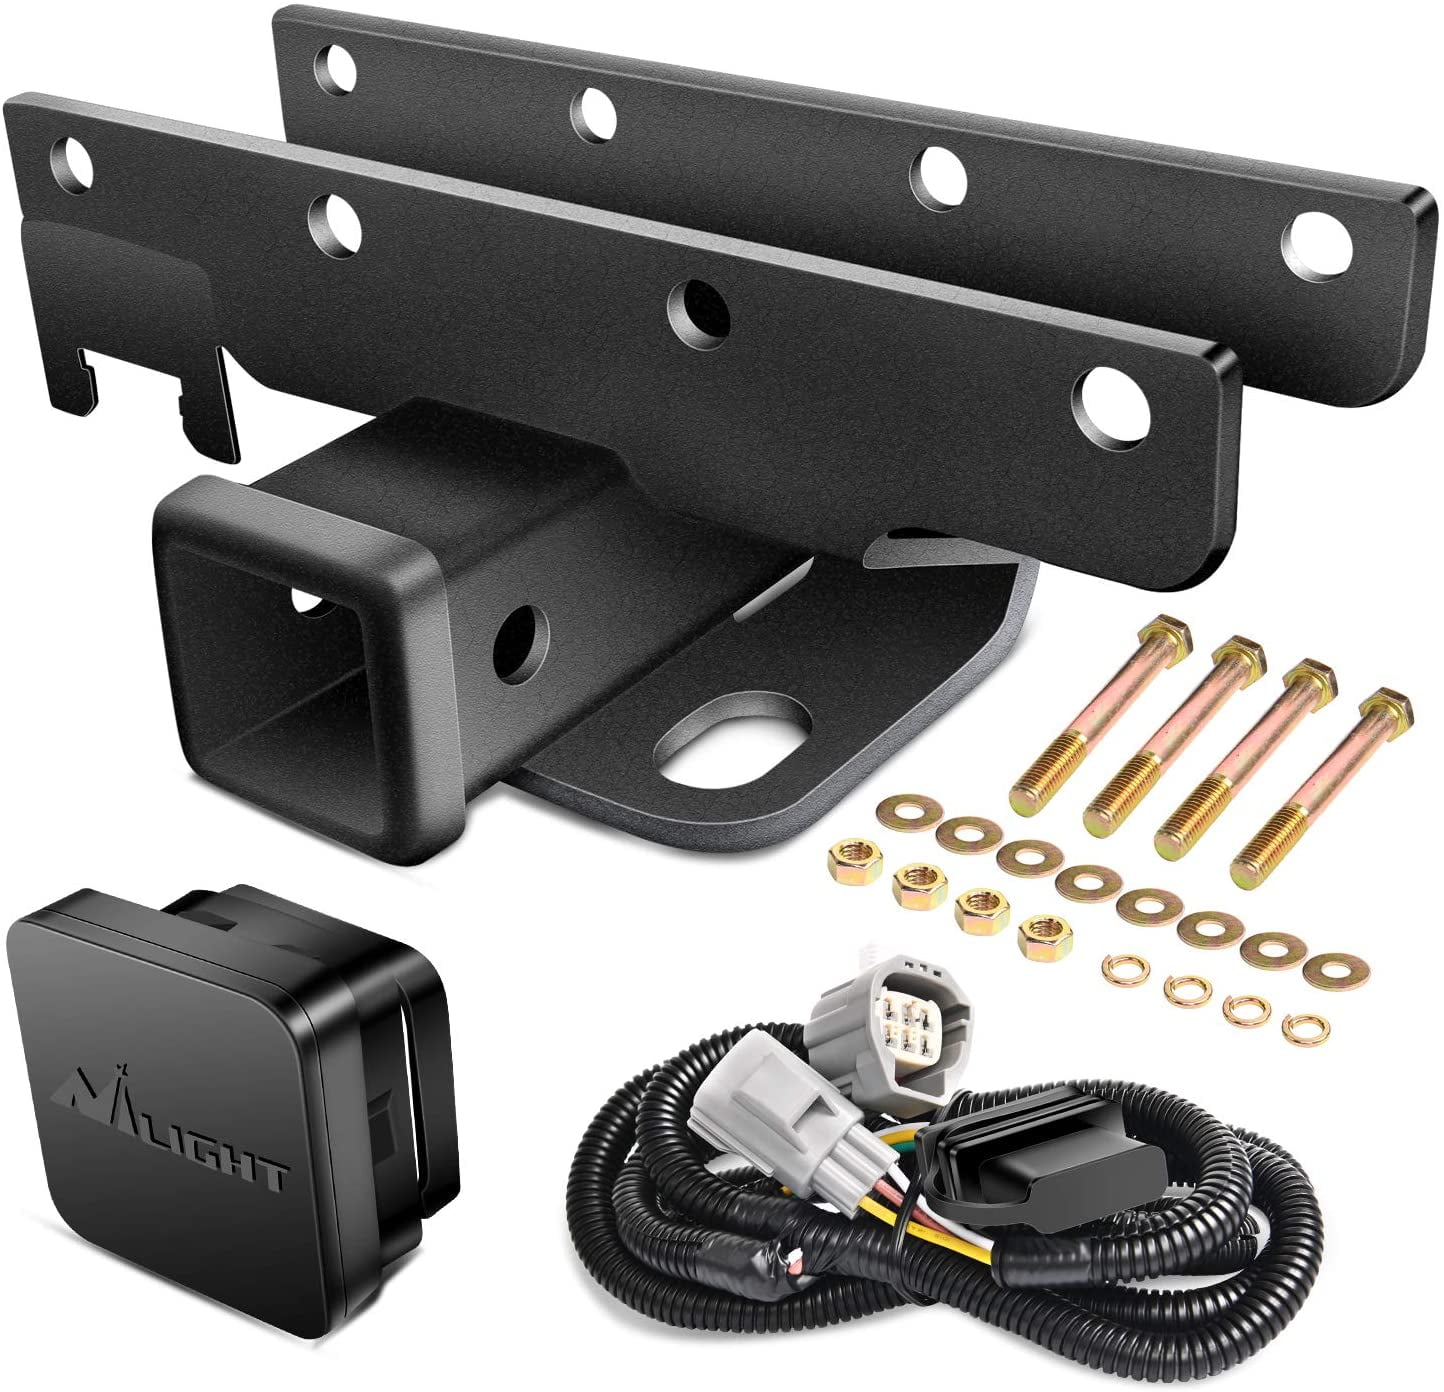 Nilight 2 inch Rear Bumper Tow Trailer Hitch Receiver Kit for